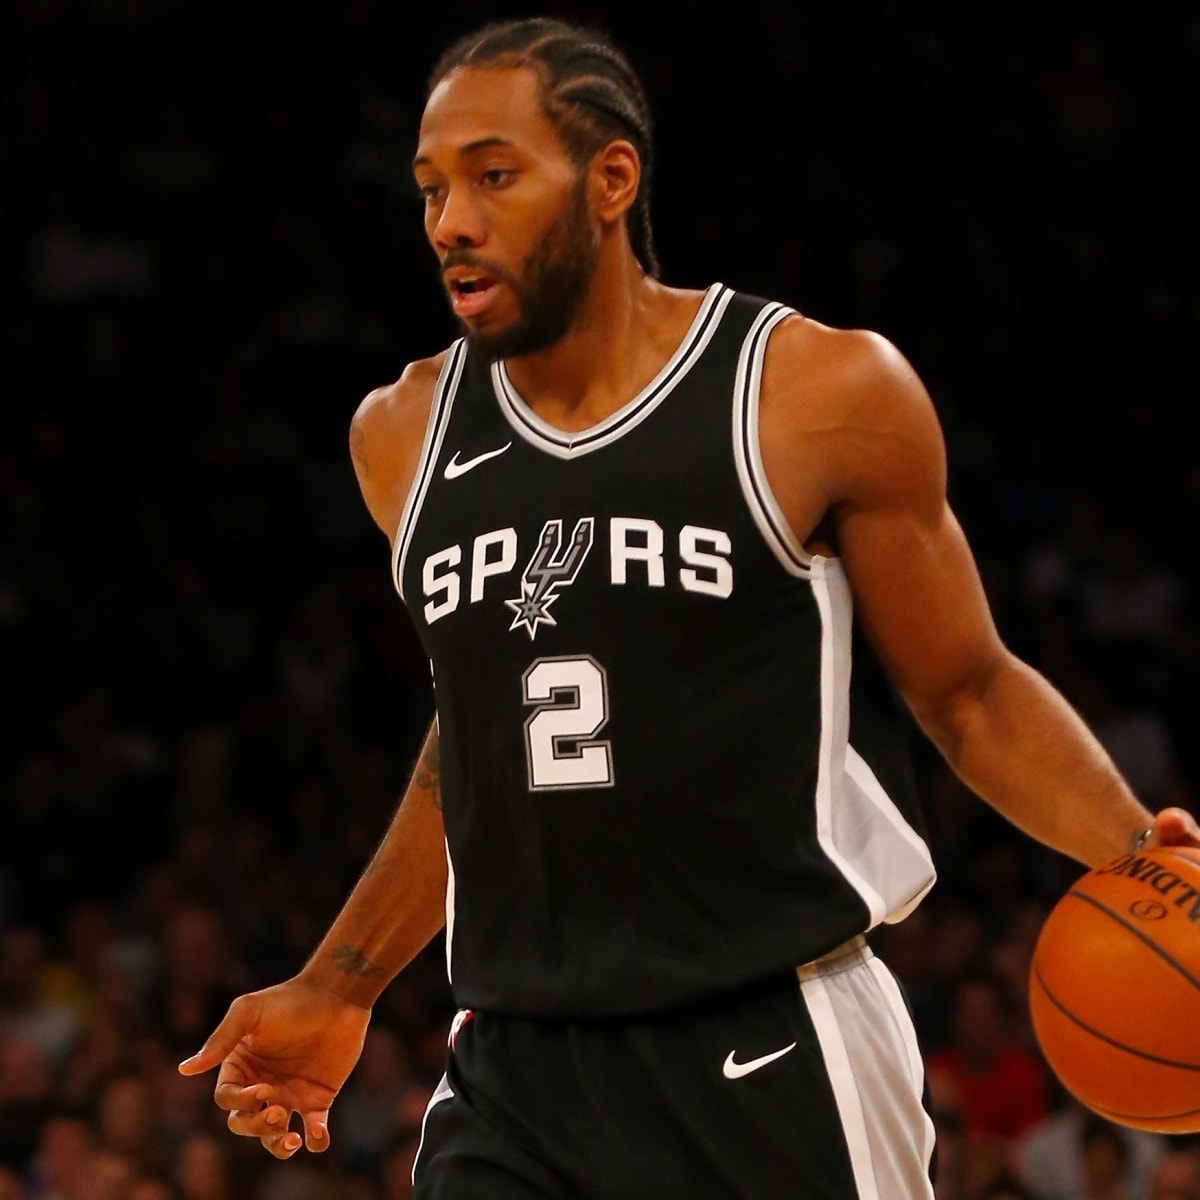 Manu Ginobili of San Antonio Spurs says doctors have cleared him to play  after recovering from testicular surgery - ESPN